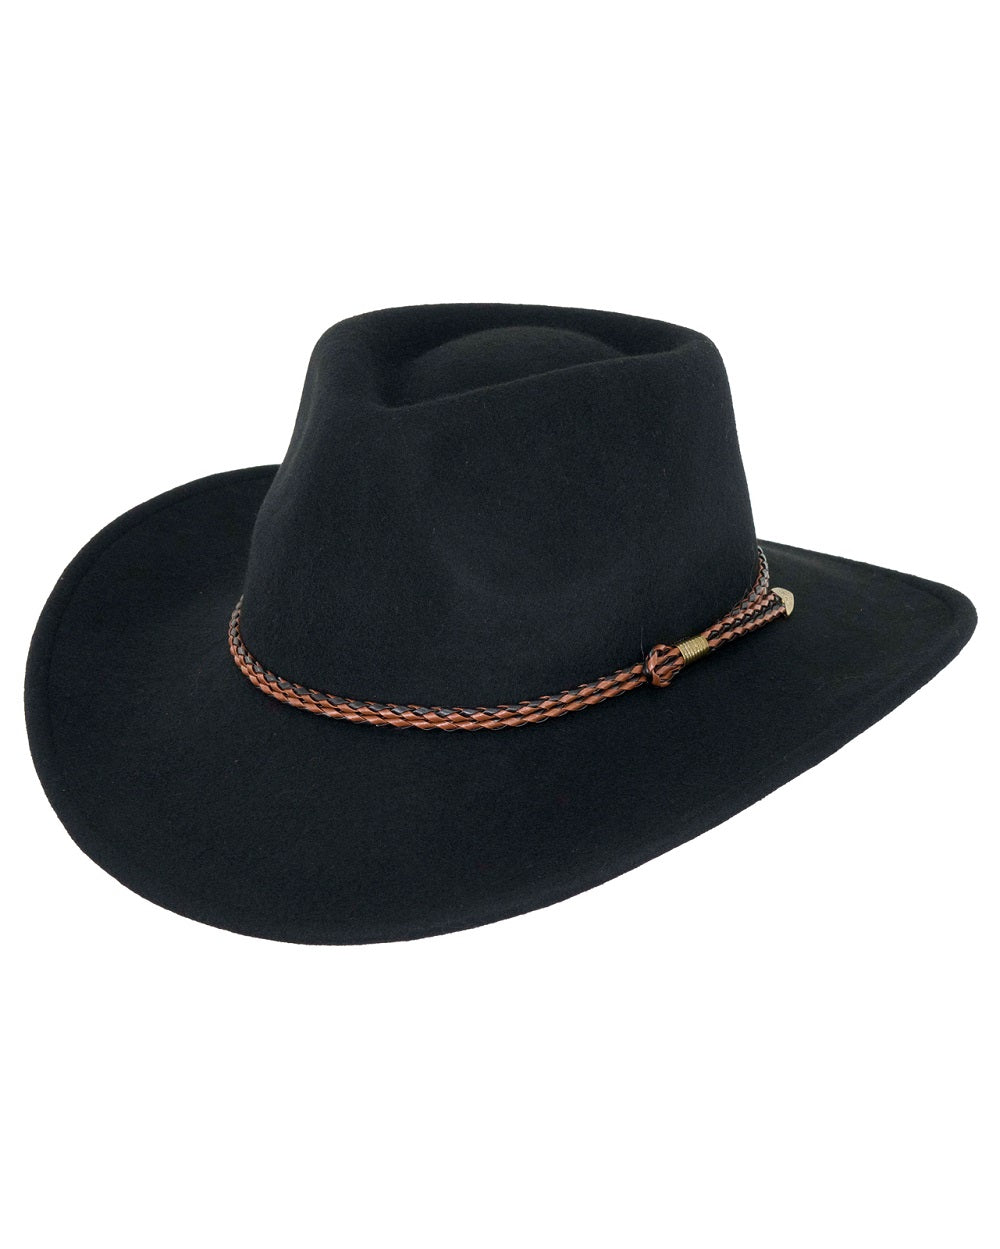 Hat Bands - Outback Trading Company